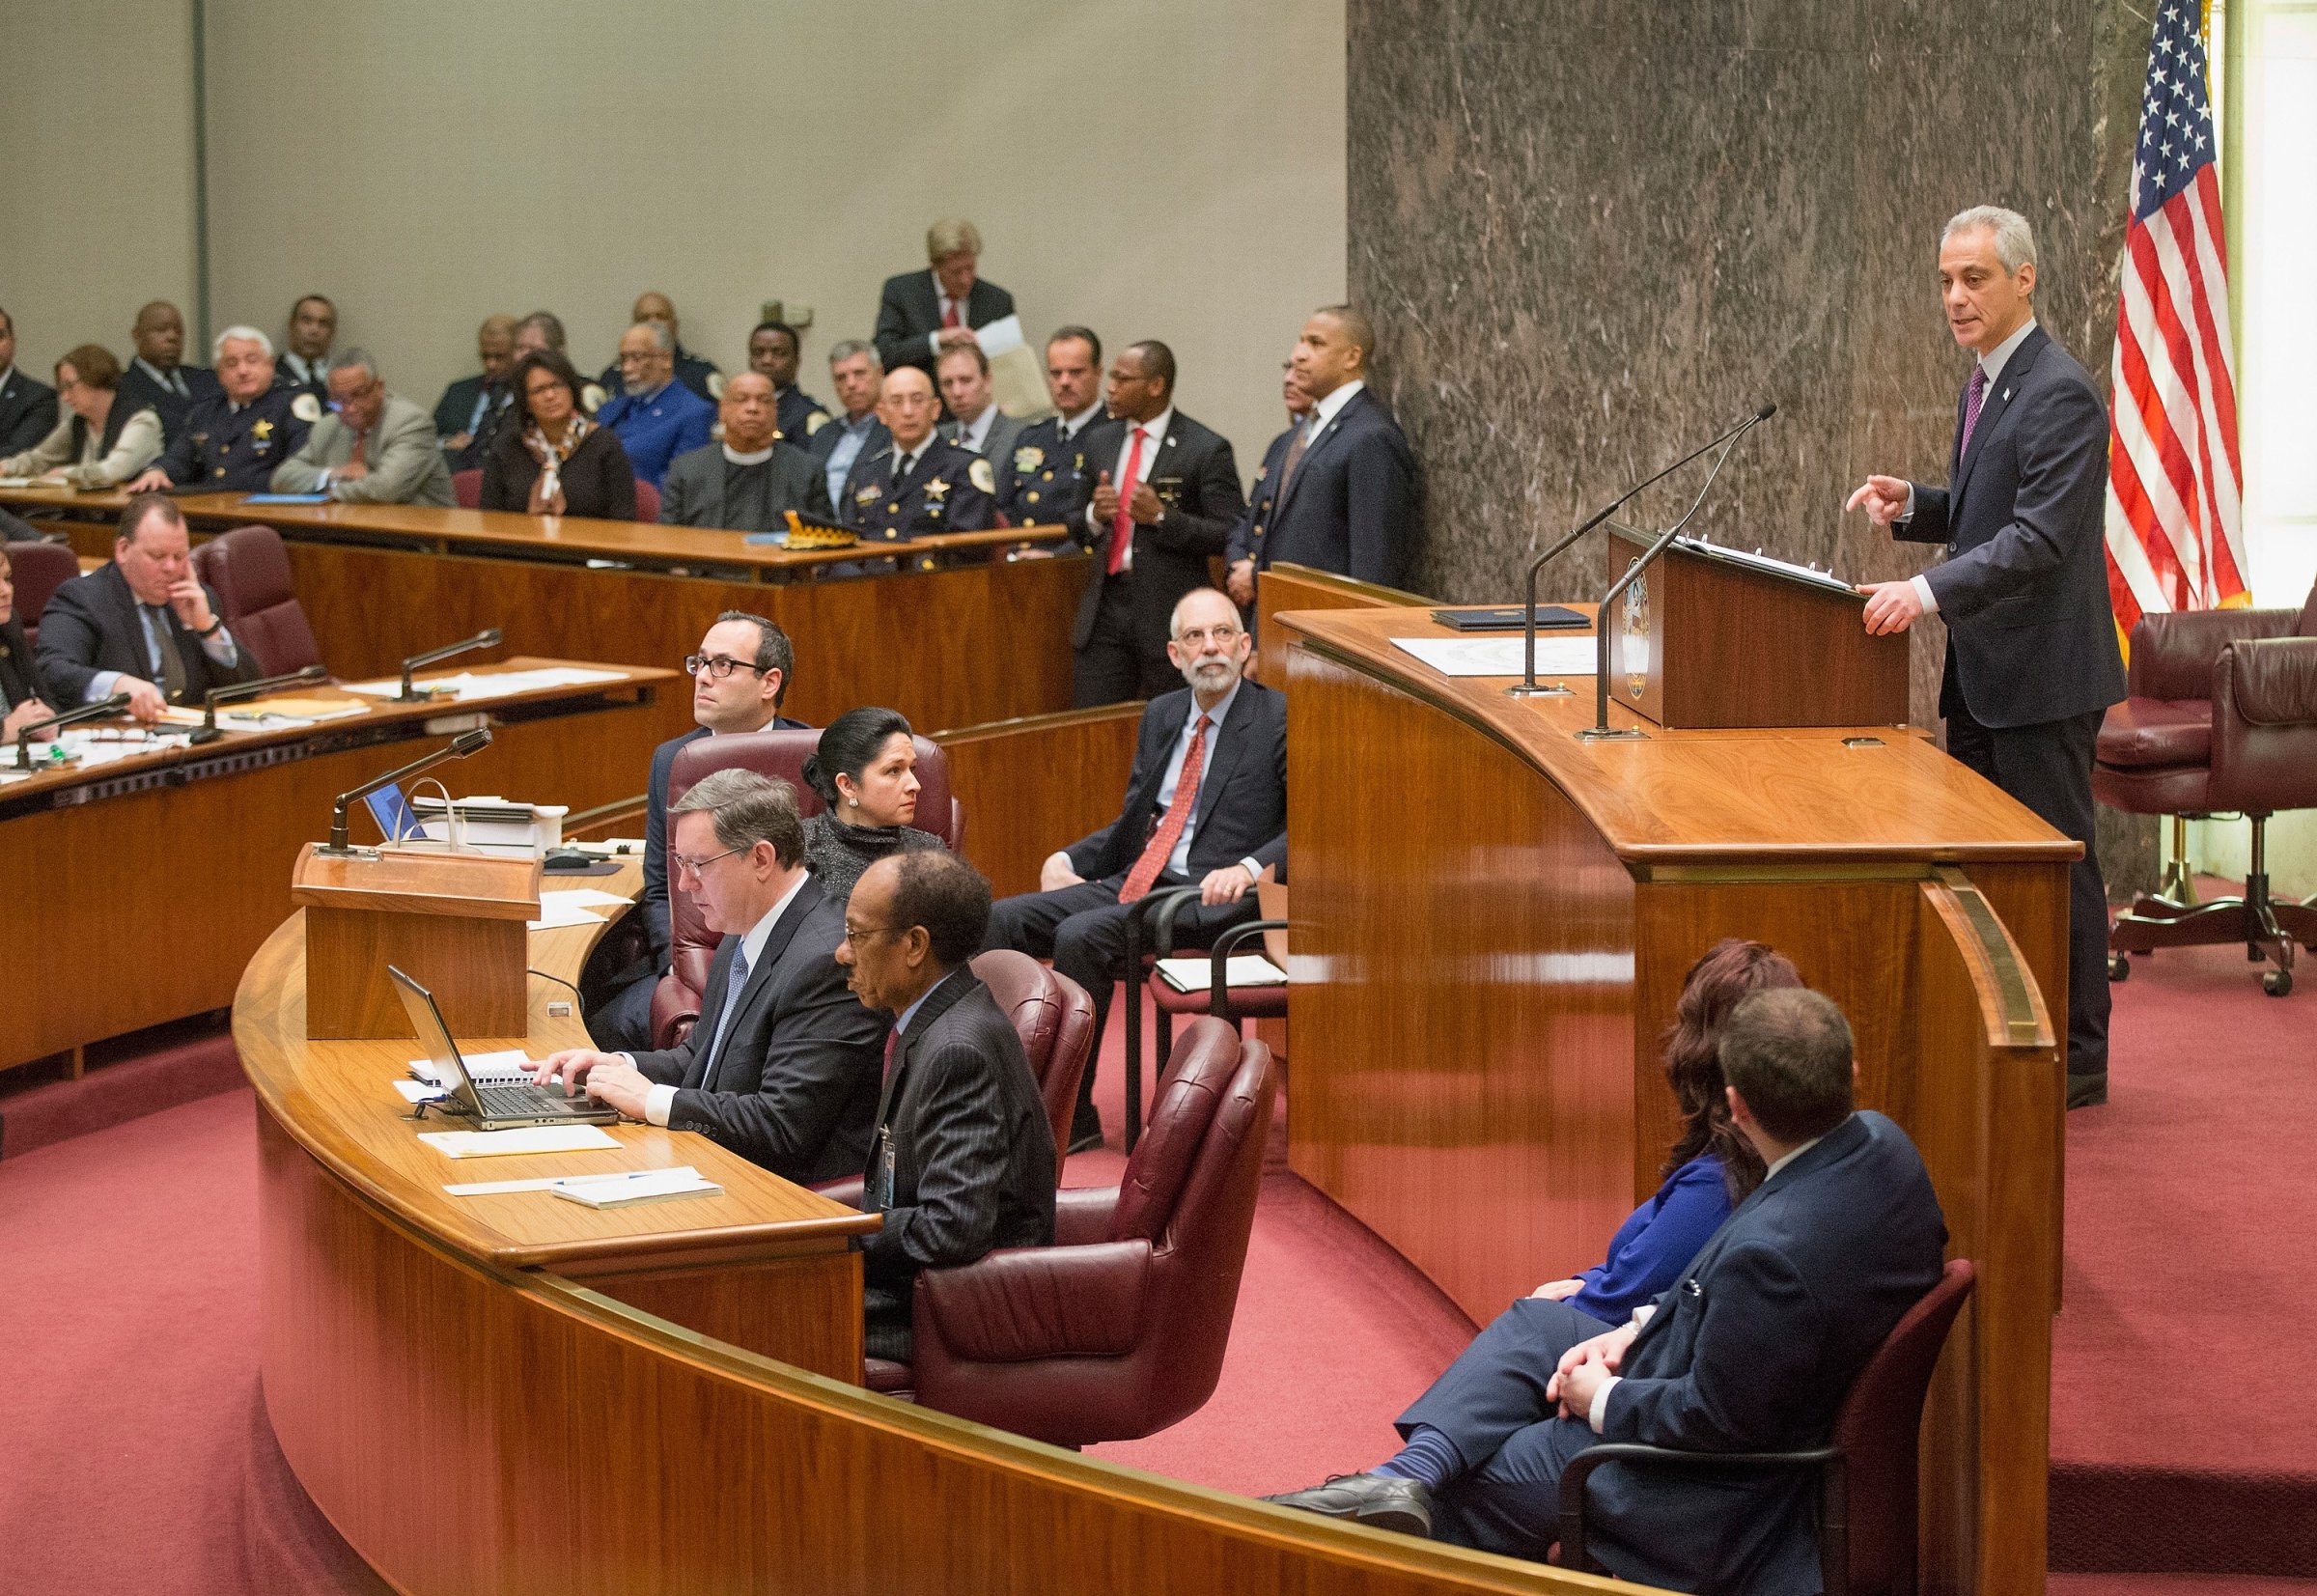 Chicago Mayor Rahm Emanuel Addresses Police Misconduct At Chicago City Council Meeting